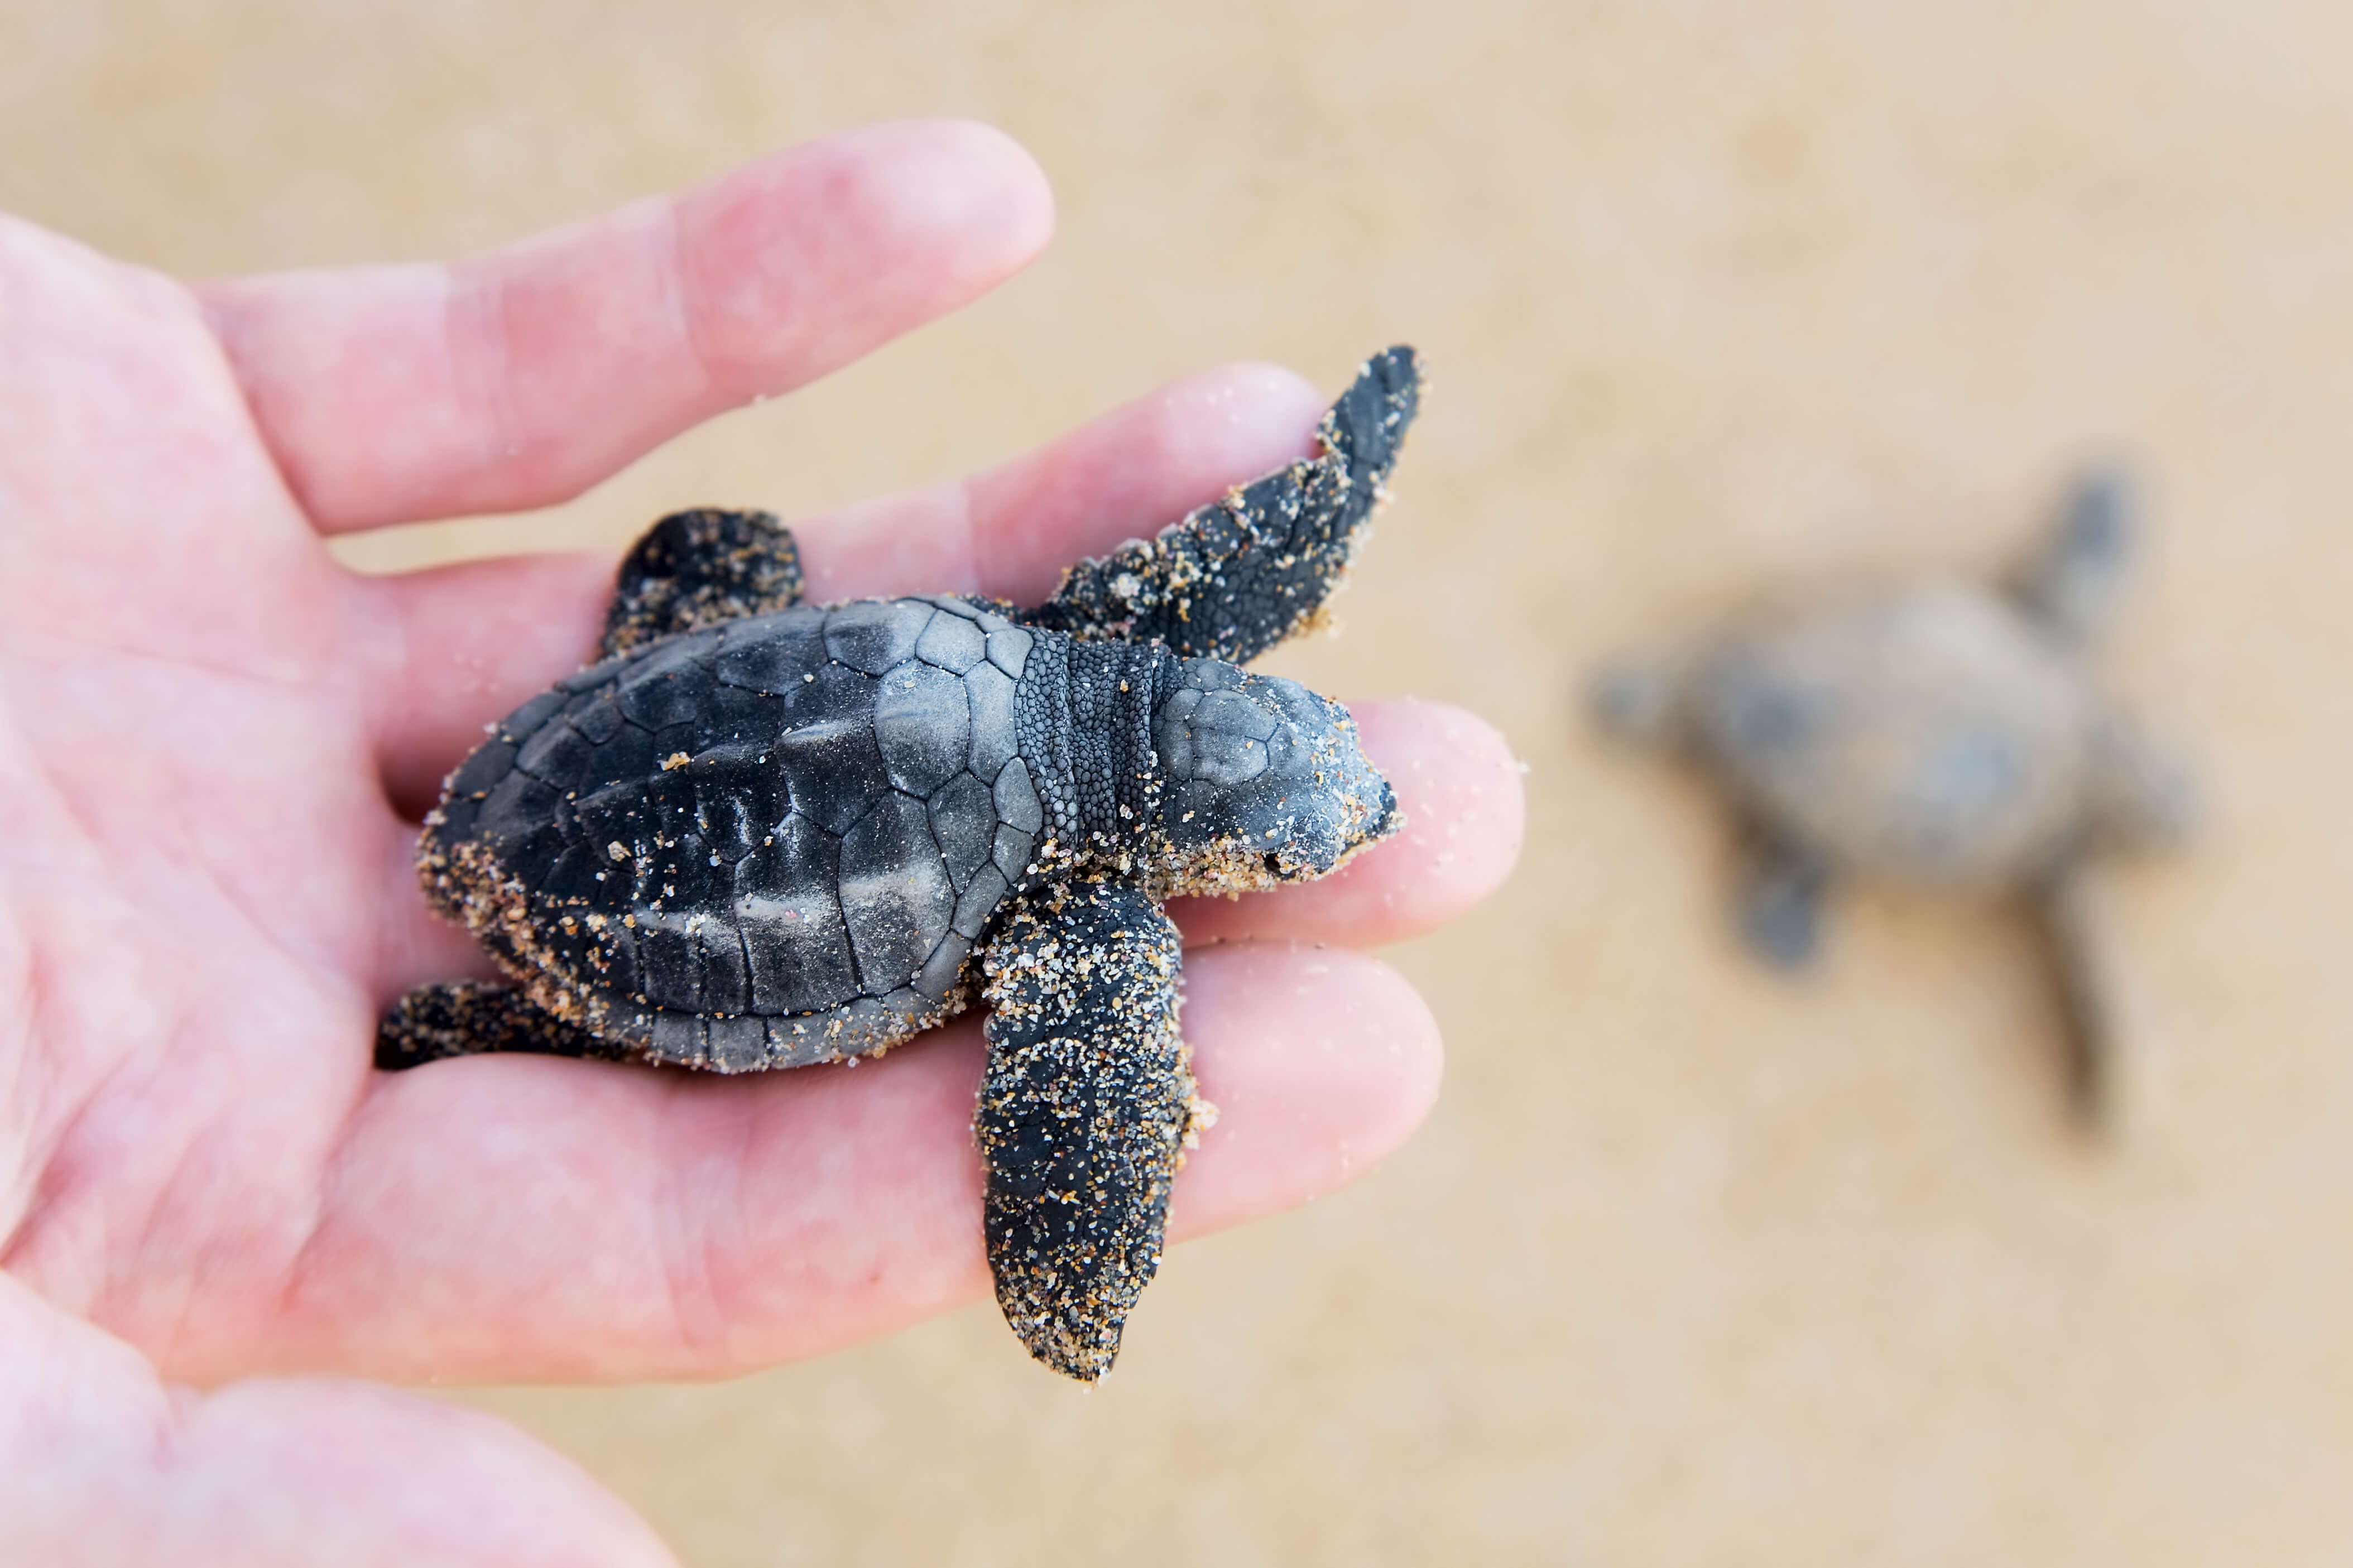 Baby turtles hatch between July and August